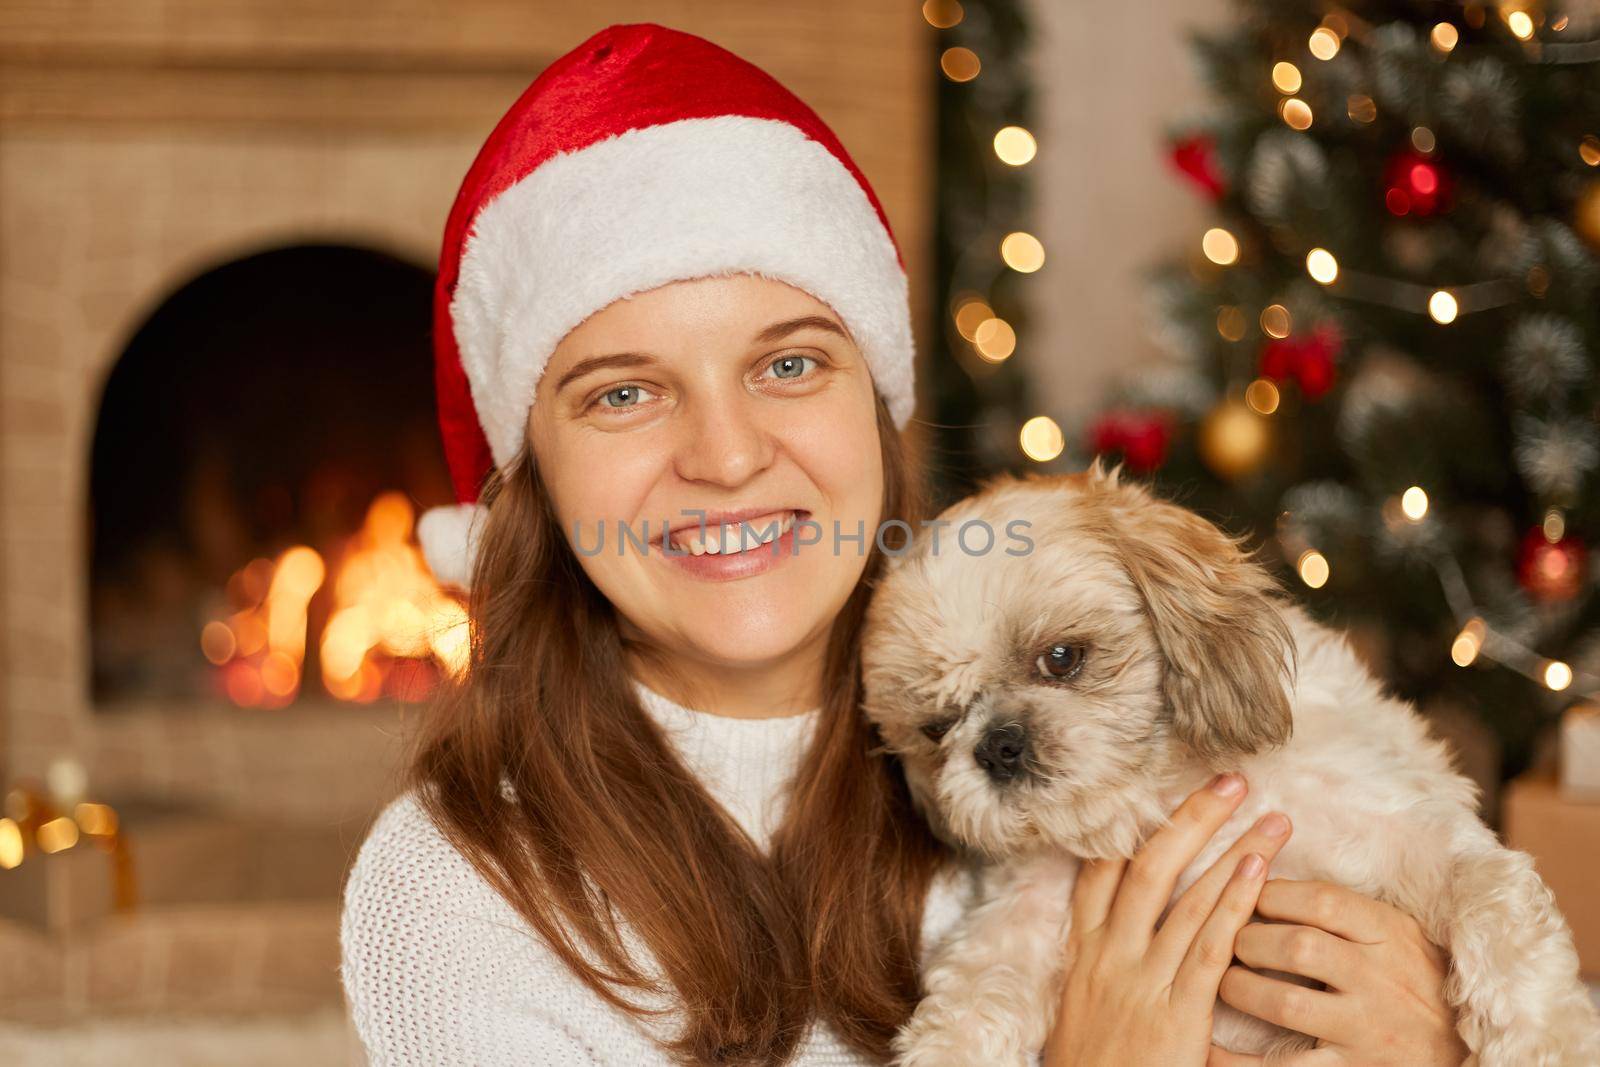 Woman with toothy smile hugging her small poodle dog, looks at camera, wearing christmas hat and white sweater, being in room decorated with lights, x-mas tree, posing near fireplace.